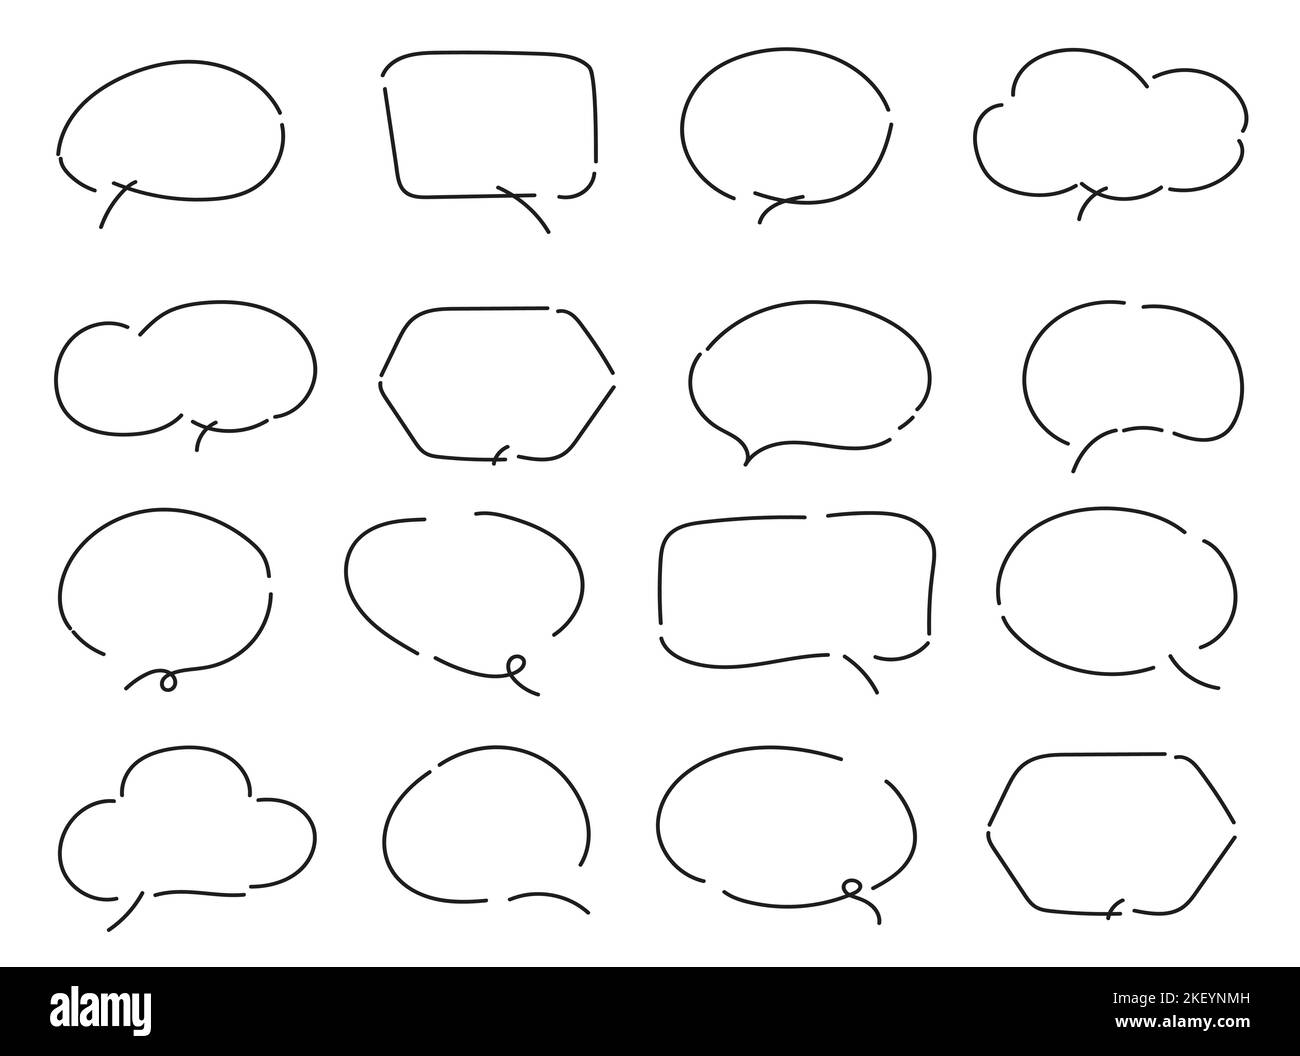 Vector Set of speech bubbles. Dialog box icon, message template. White clouds for text, lettering. Different shape of empty balloons for talk on blue background. Flat vector illustration. Stock Vector